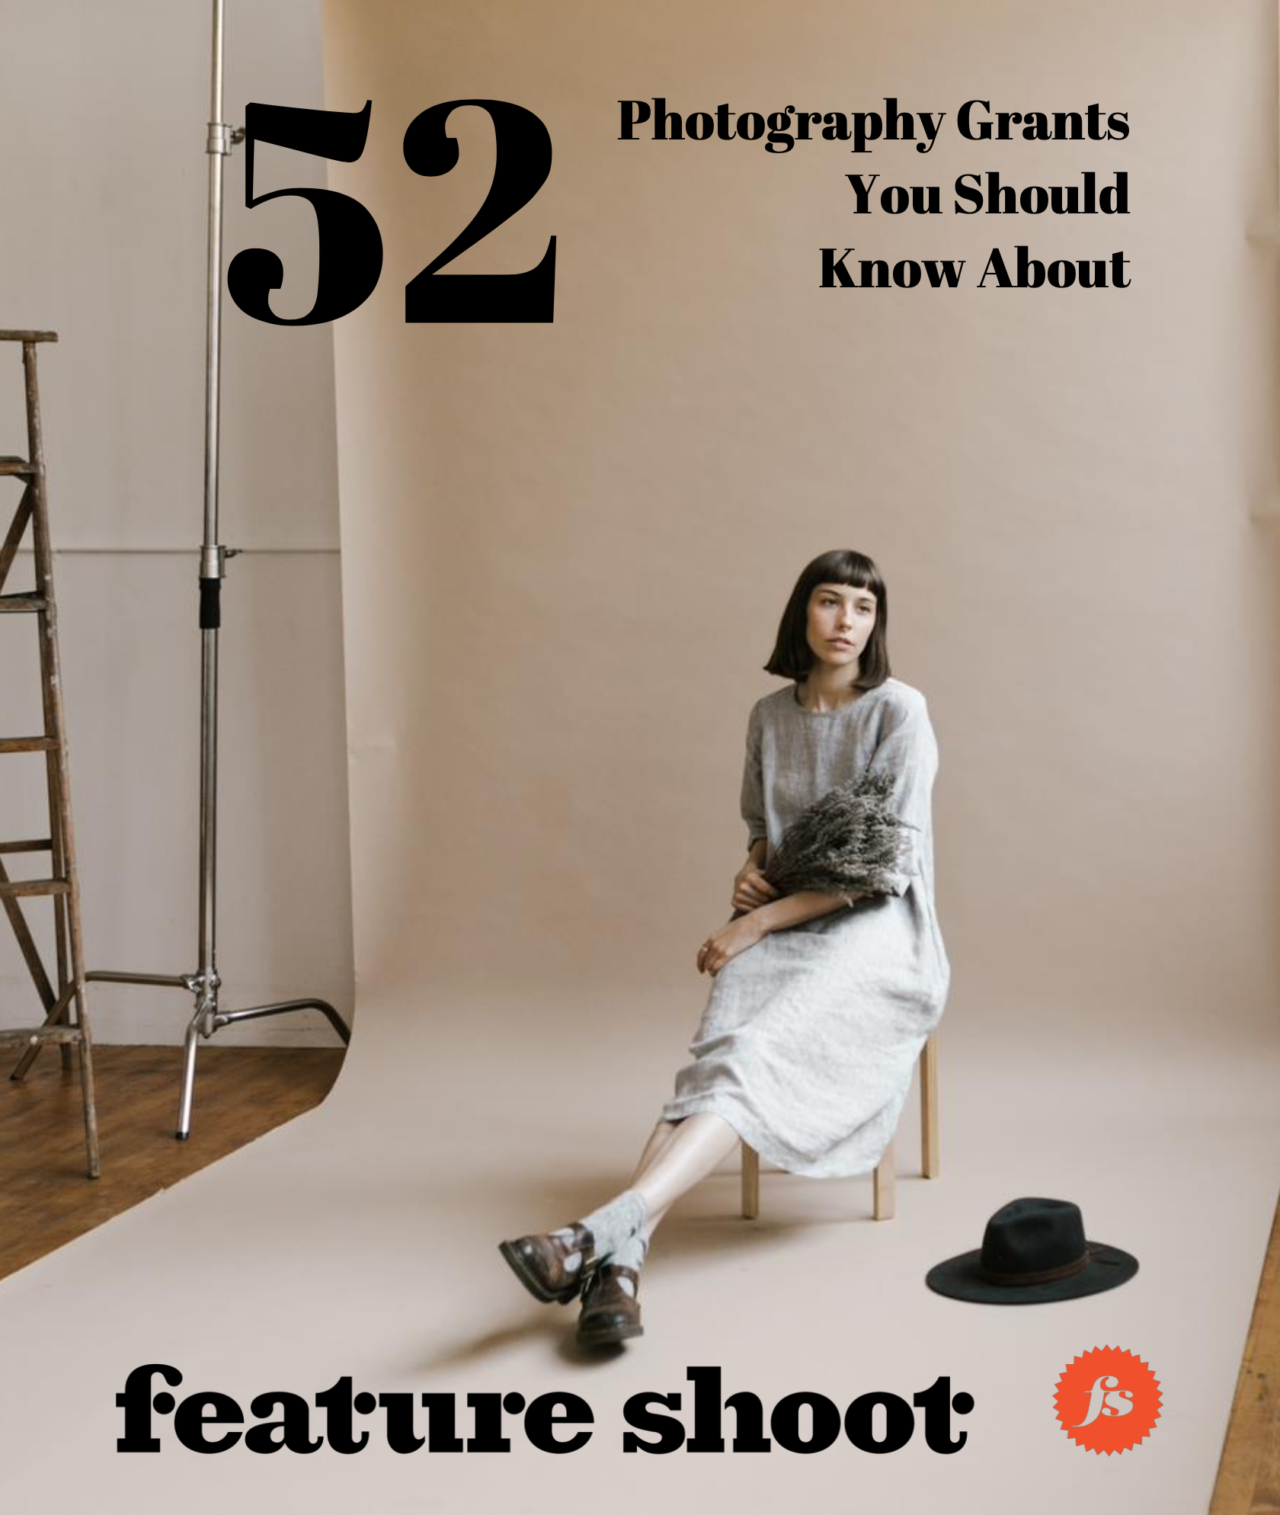 New Guide! 52 Photography Grants You Should Know About Feature Shoot